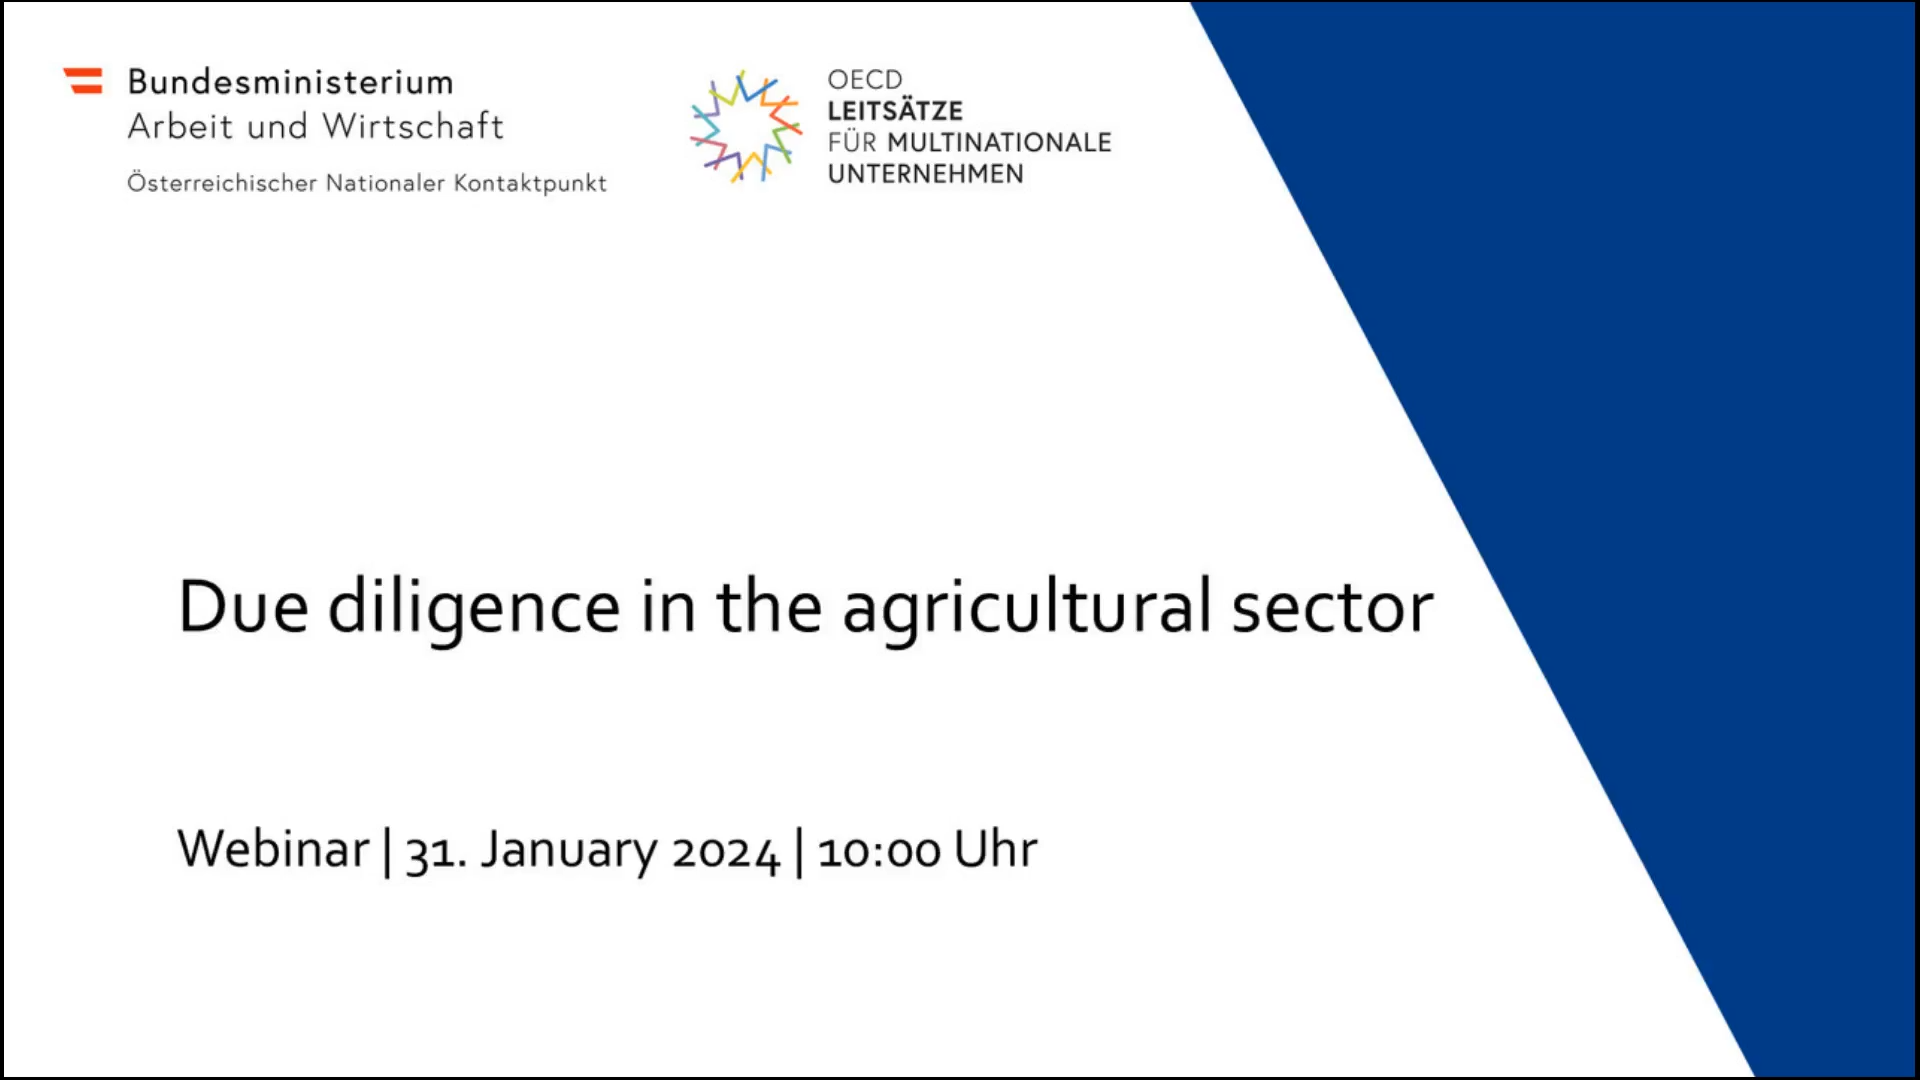 Webinar: Due diligence in the agricultural sector